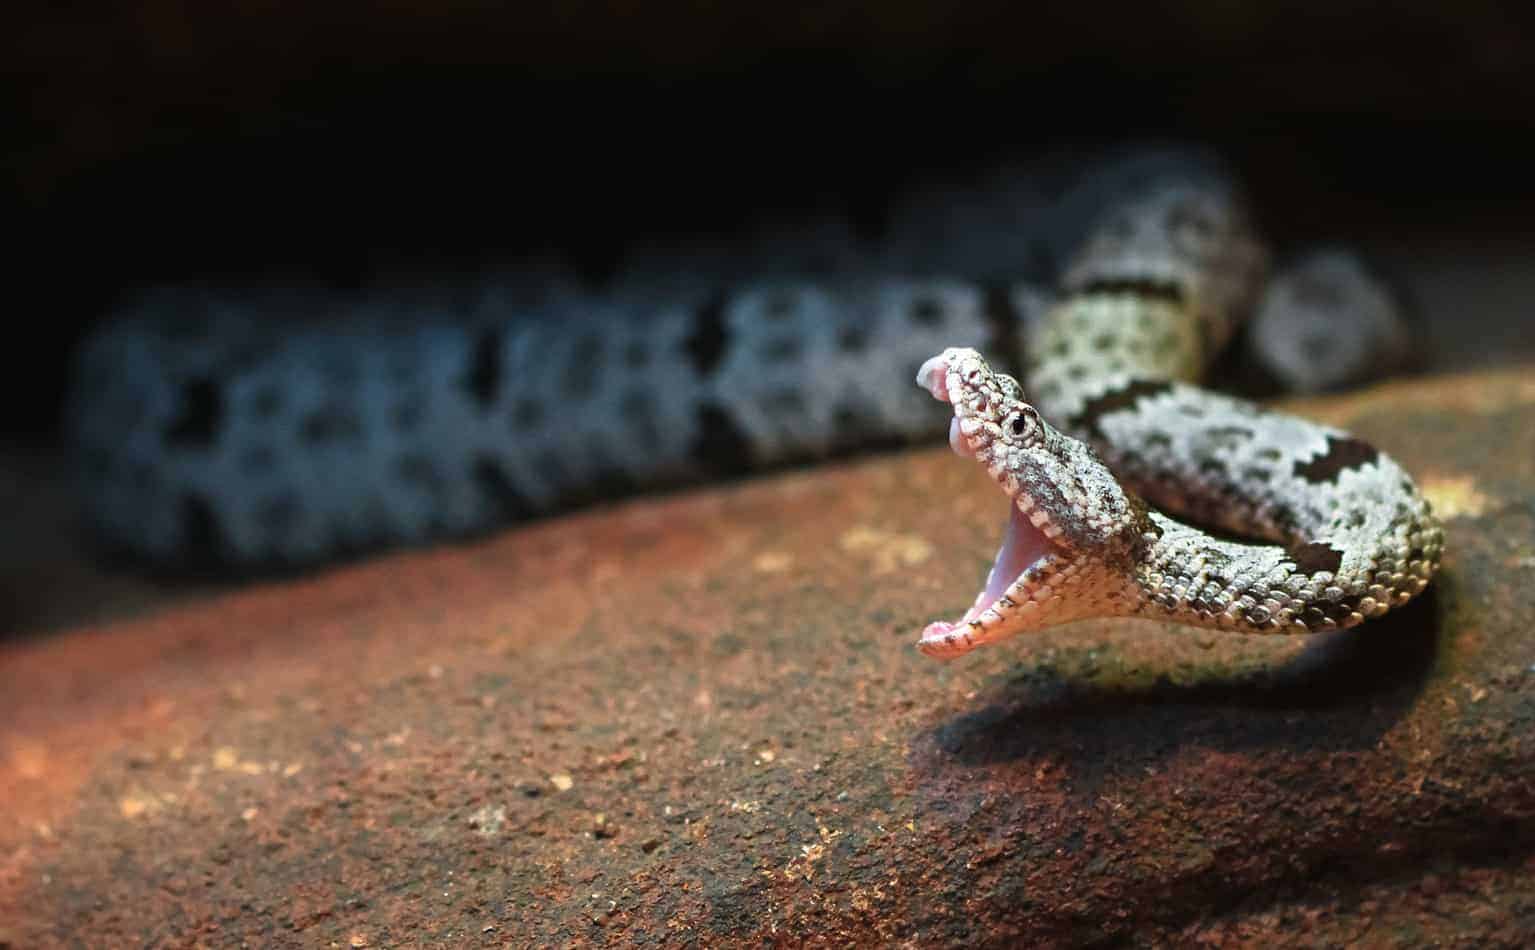 27 fascinating facts about rattlesnakes 7 27 Fascinating Facts About Rattlesnakes (With Pictures)